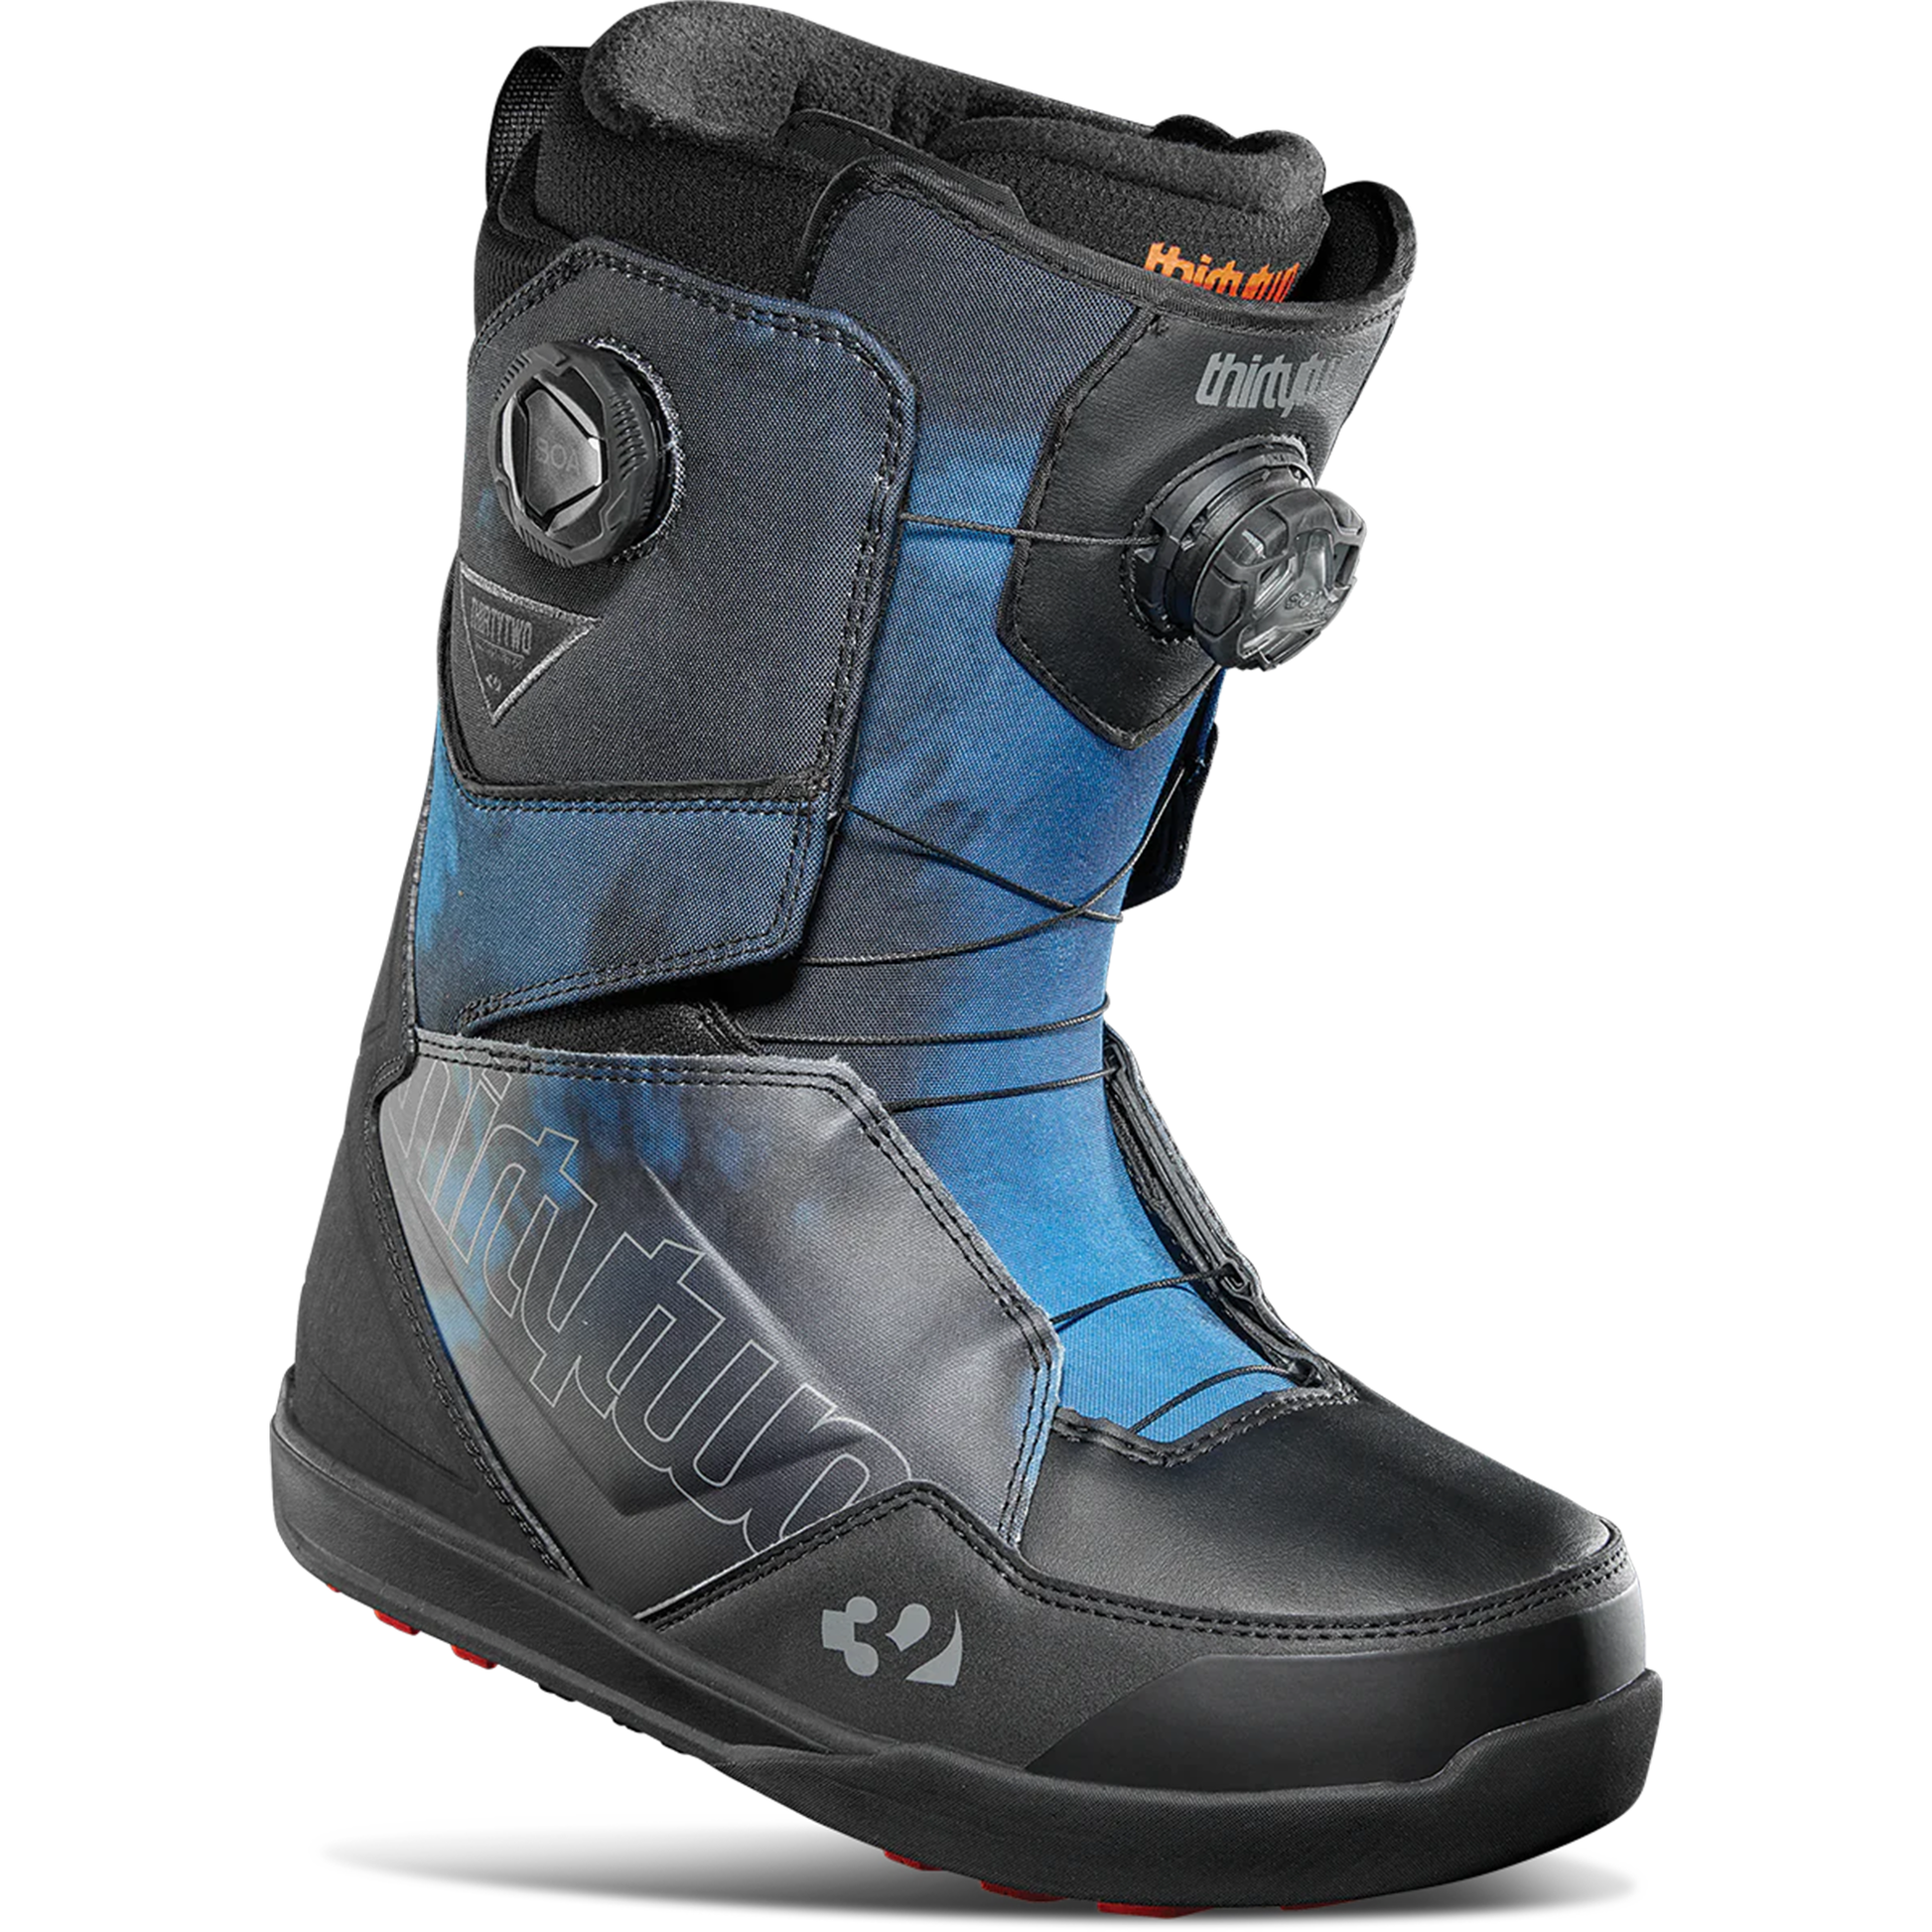 ThirtyTwo Lashed Double BOA Snowboard Boots - Openbox Tie Dye Snowboard Boots